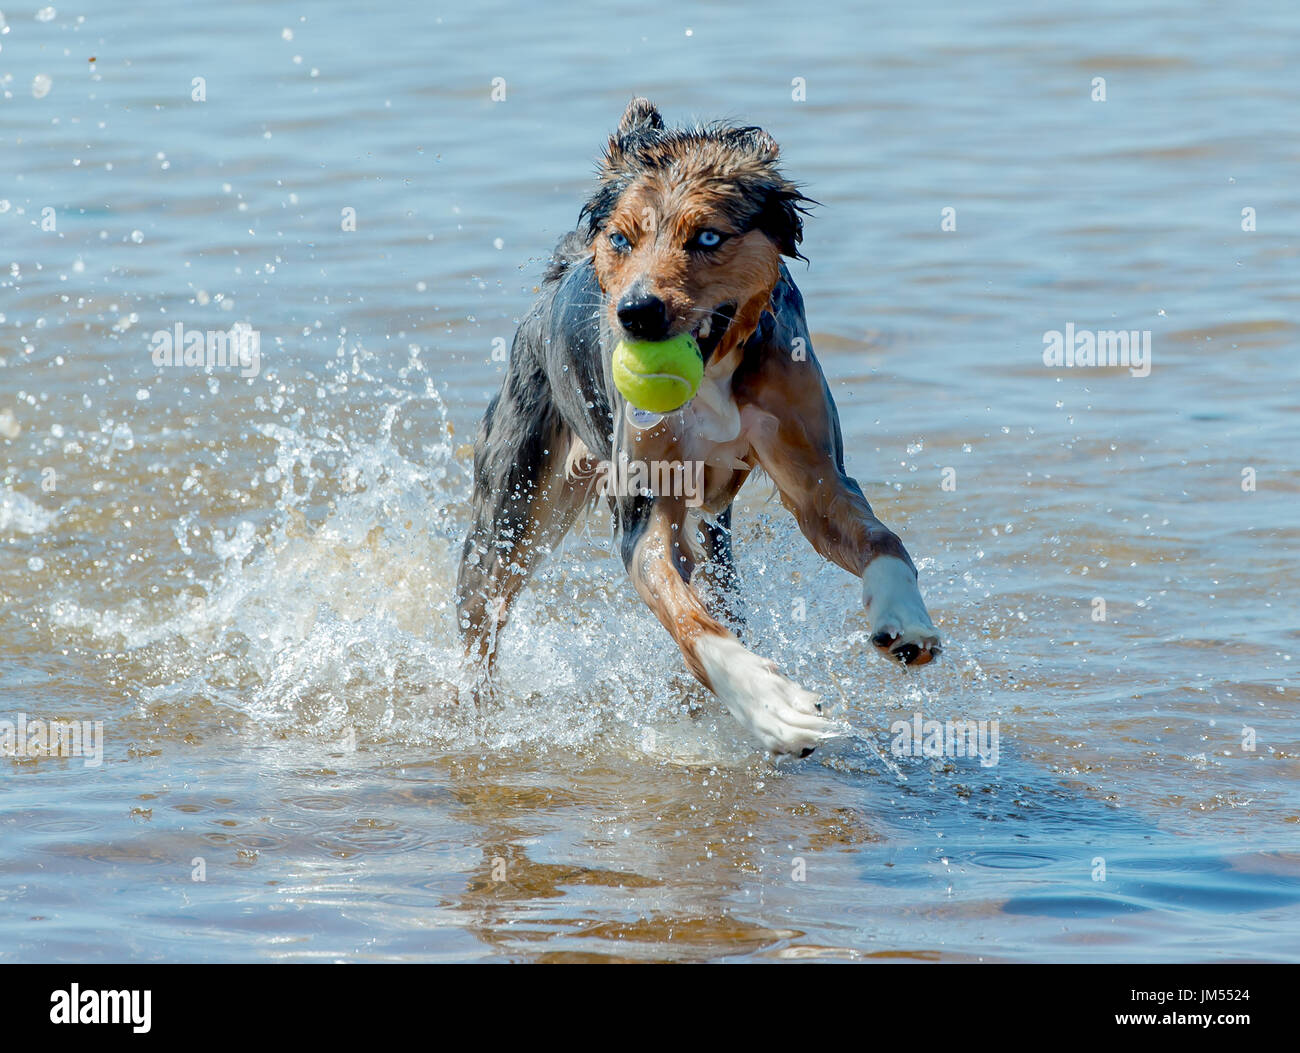 Beautiful, stunning tri color Australian Shepherd dog running and playing with tennis ball in mouth in shallow ocean water Stock Photo